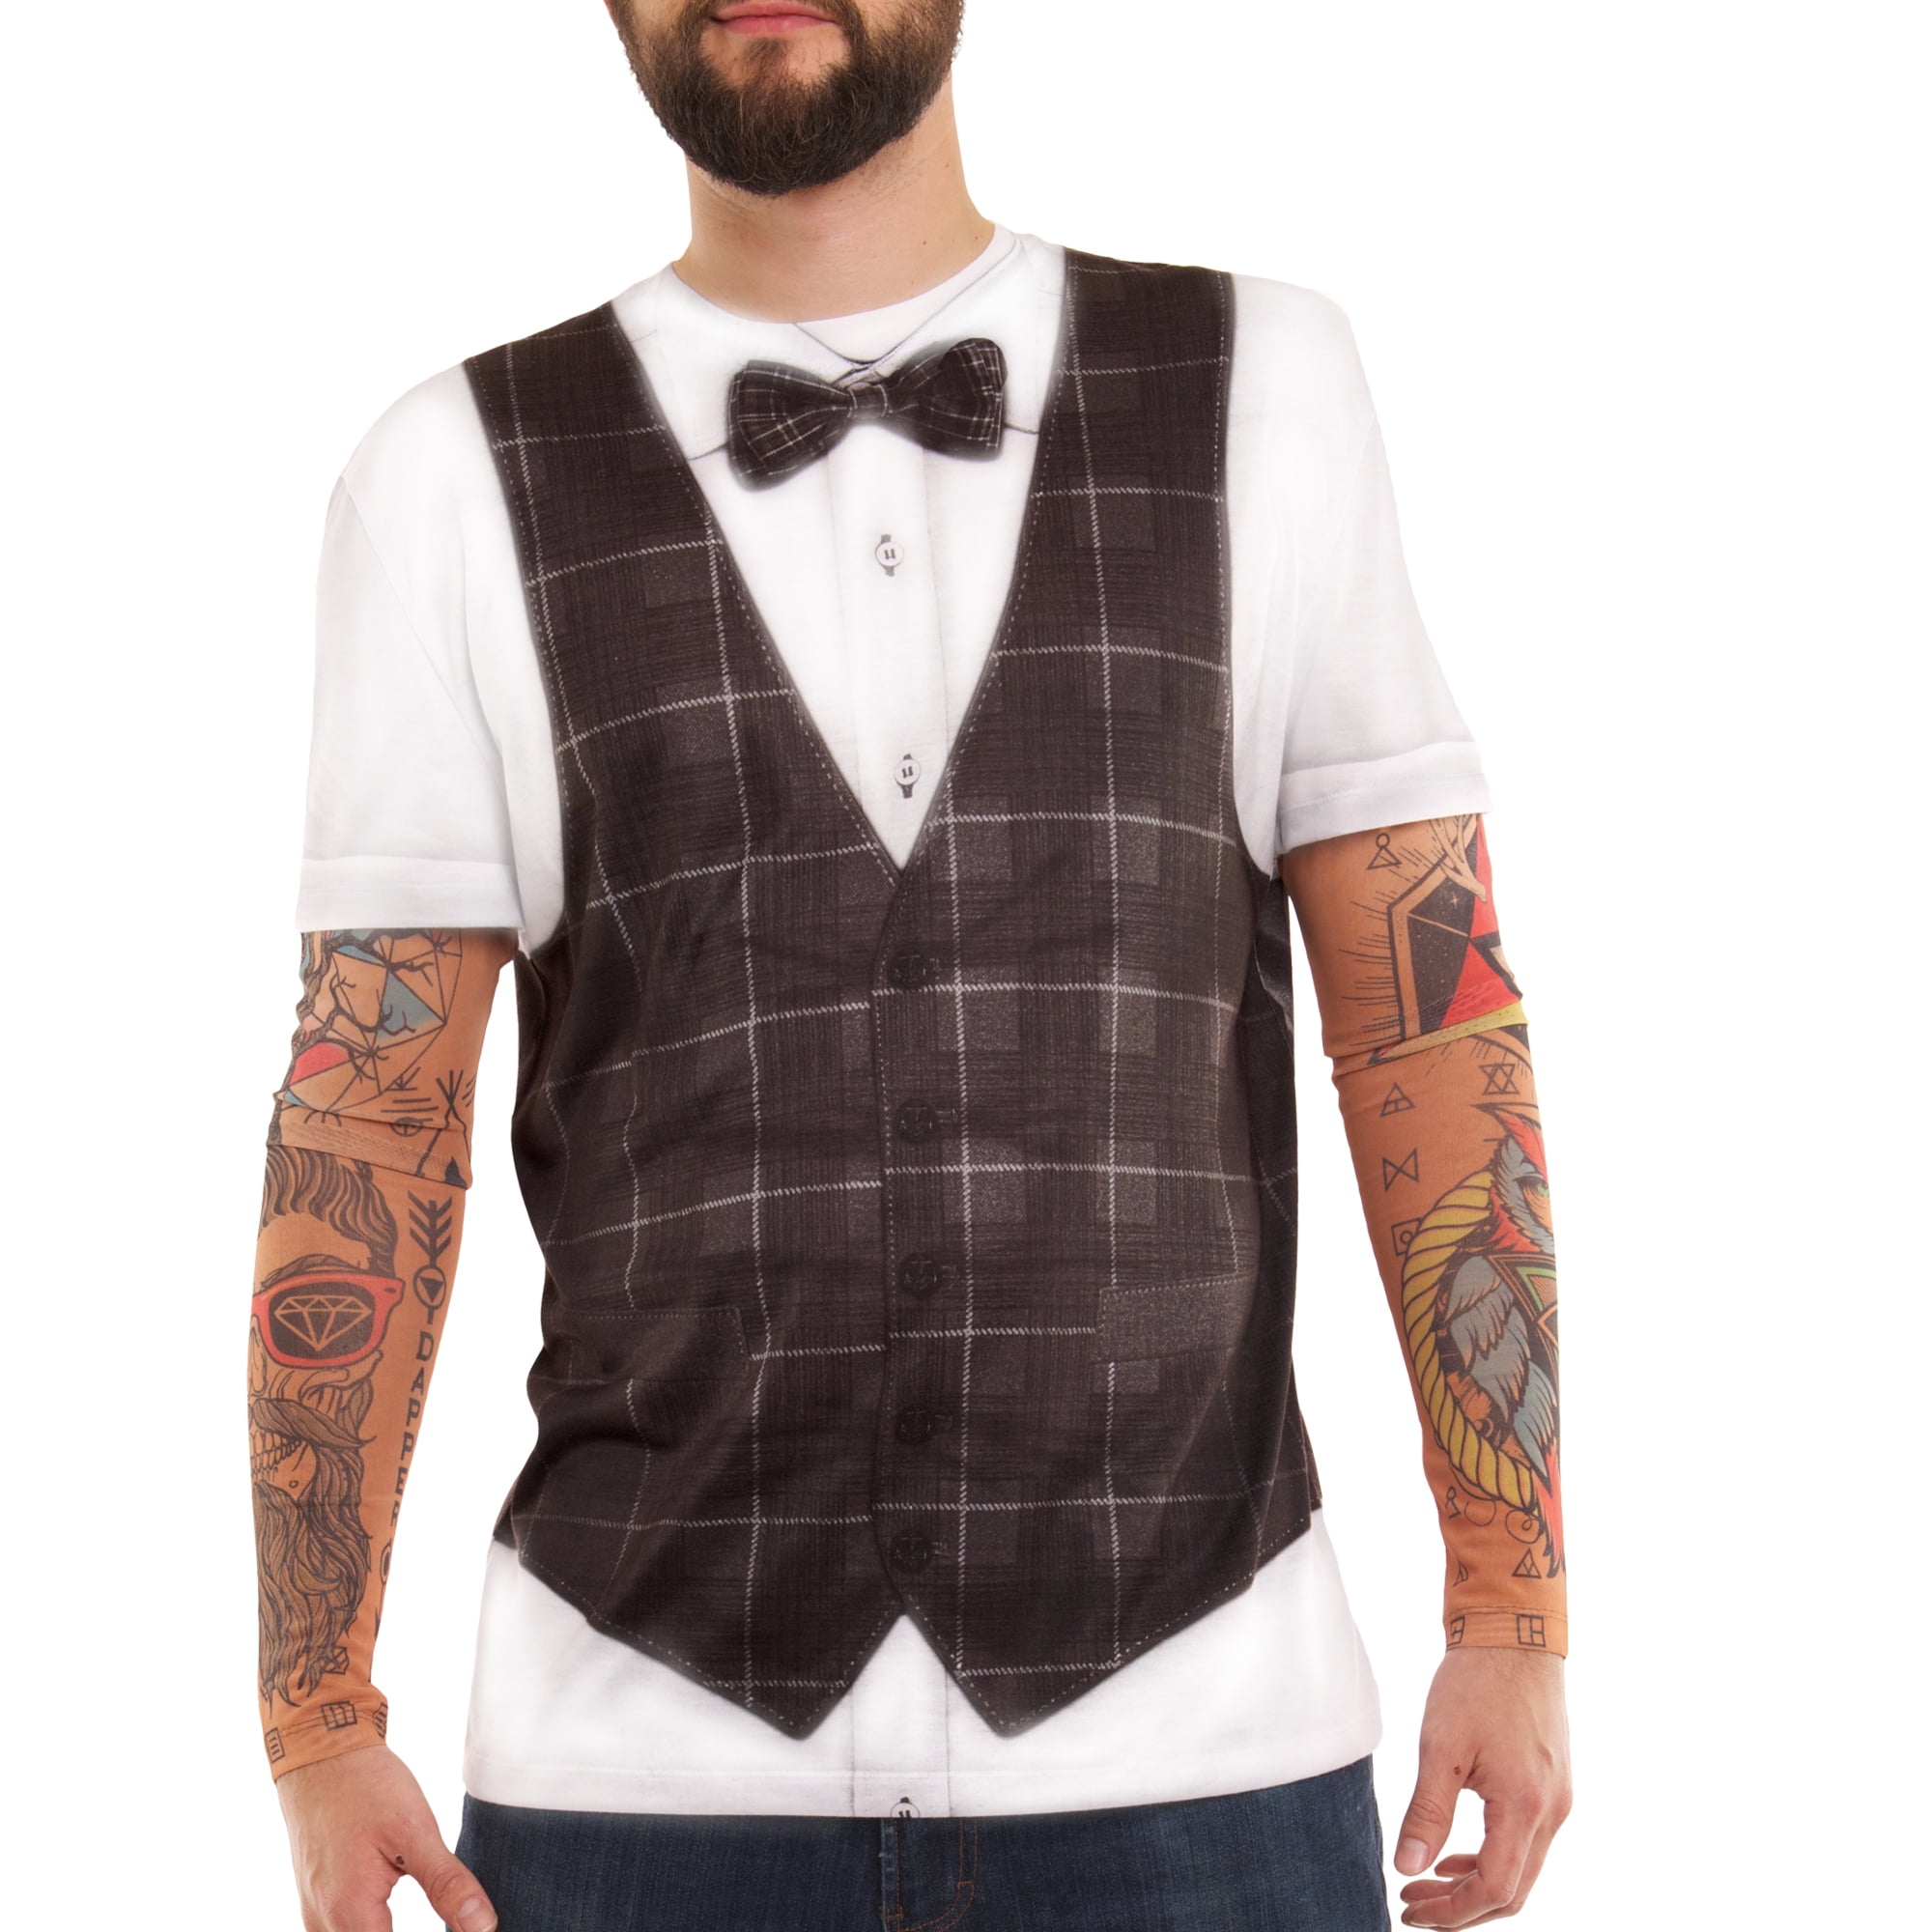 Men's Hipster Vest Tattoo Tee Shirt with Tattoo Mesh Long Sleeves ...